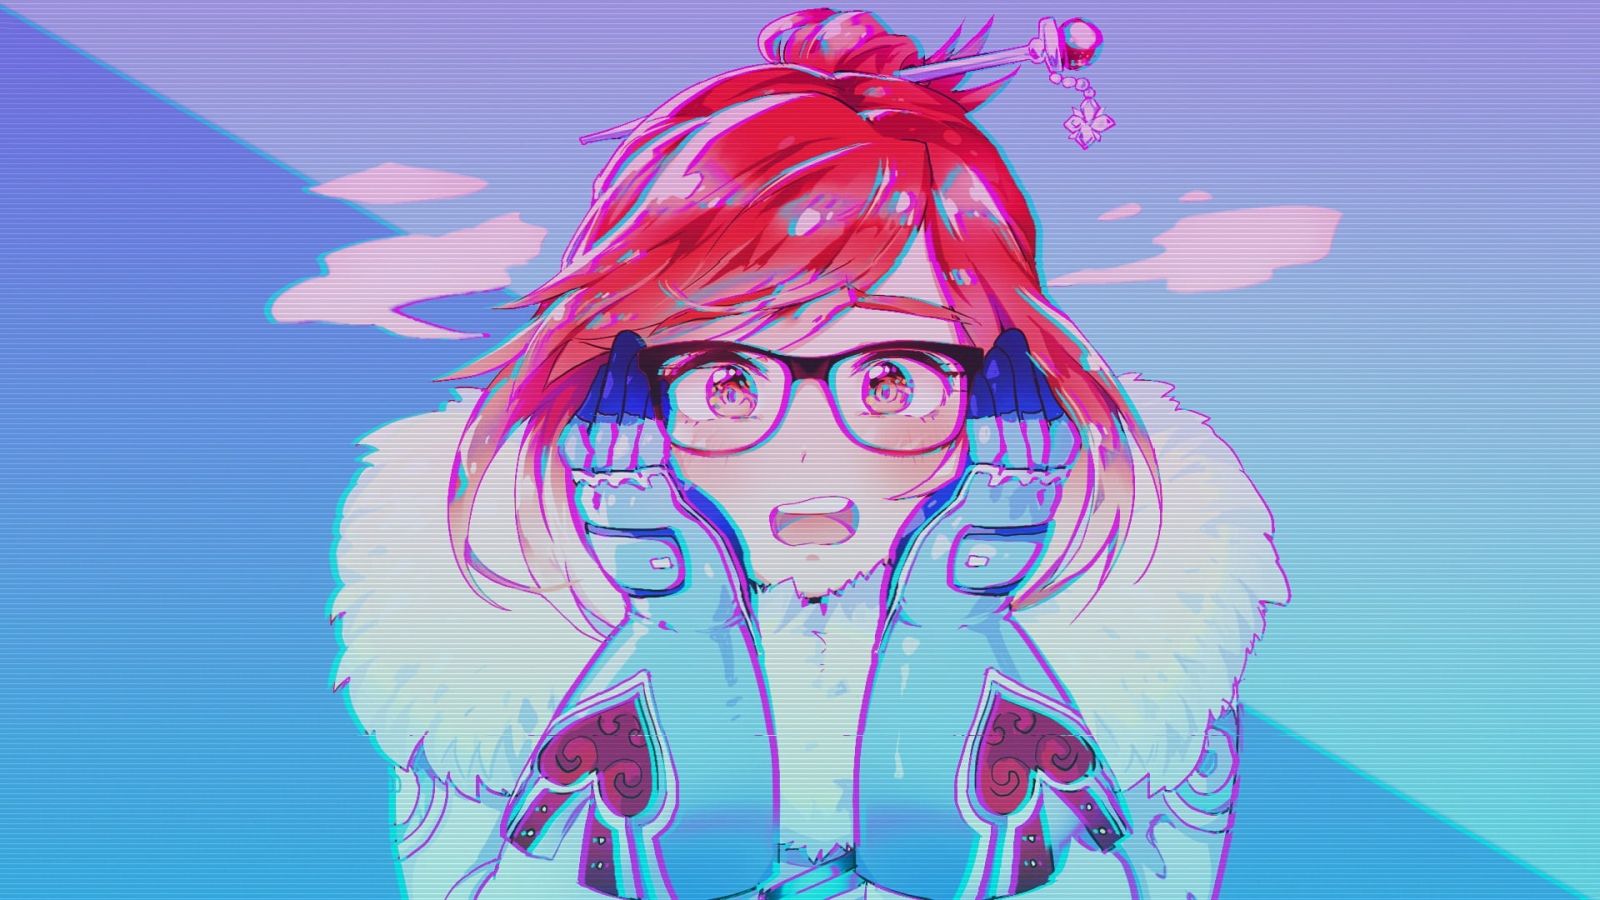 Free download Female anime character illustration Mei Overwatch